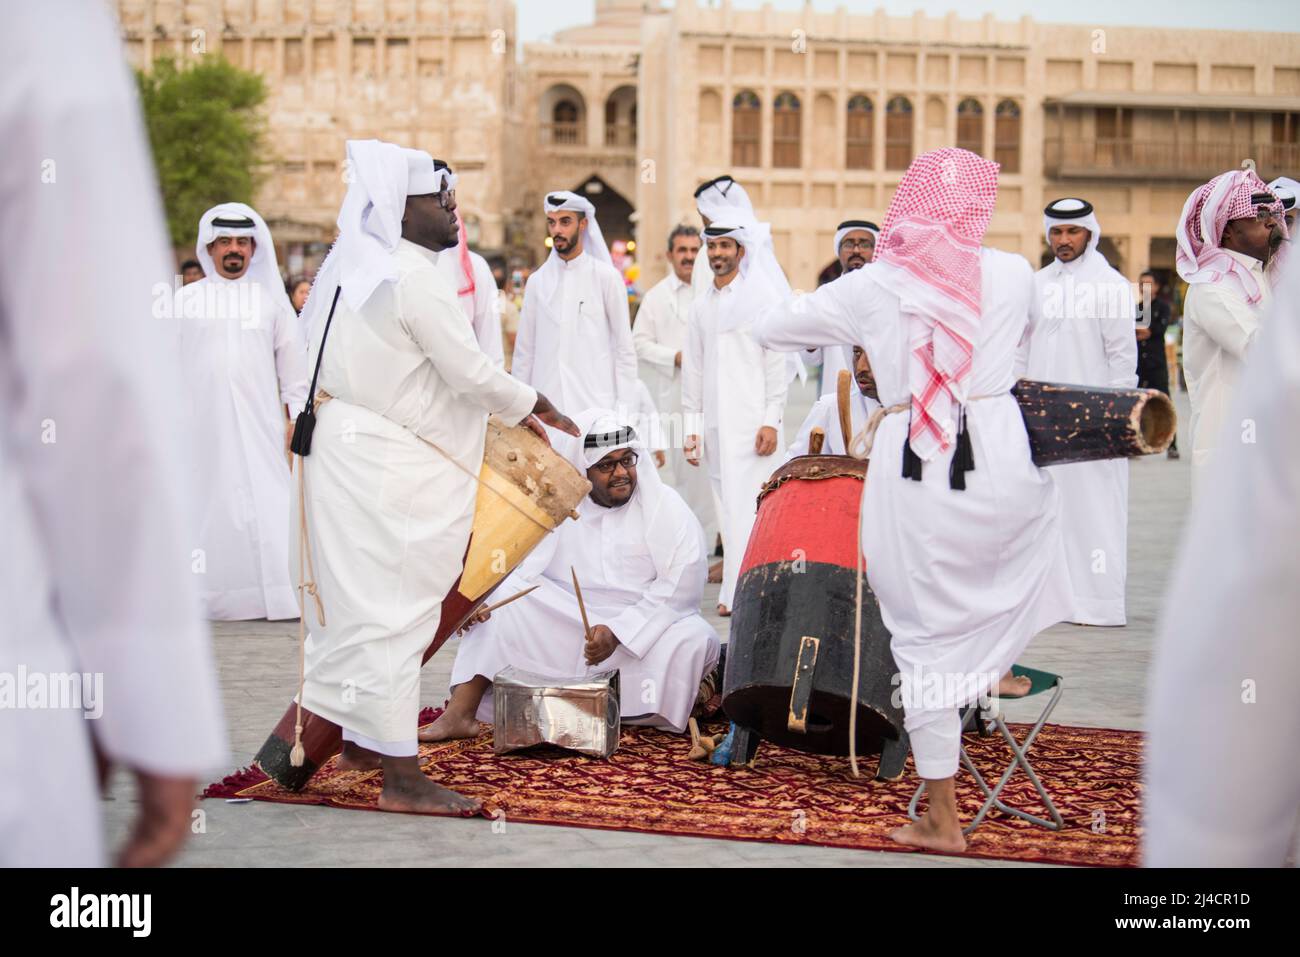 Doha,Qatar - April 22,2022: The performance of traditional Qatari music and dance is performed by local people in old bazaar market Souk Waqif. Stock Photo